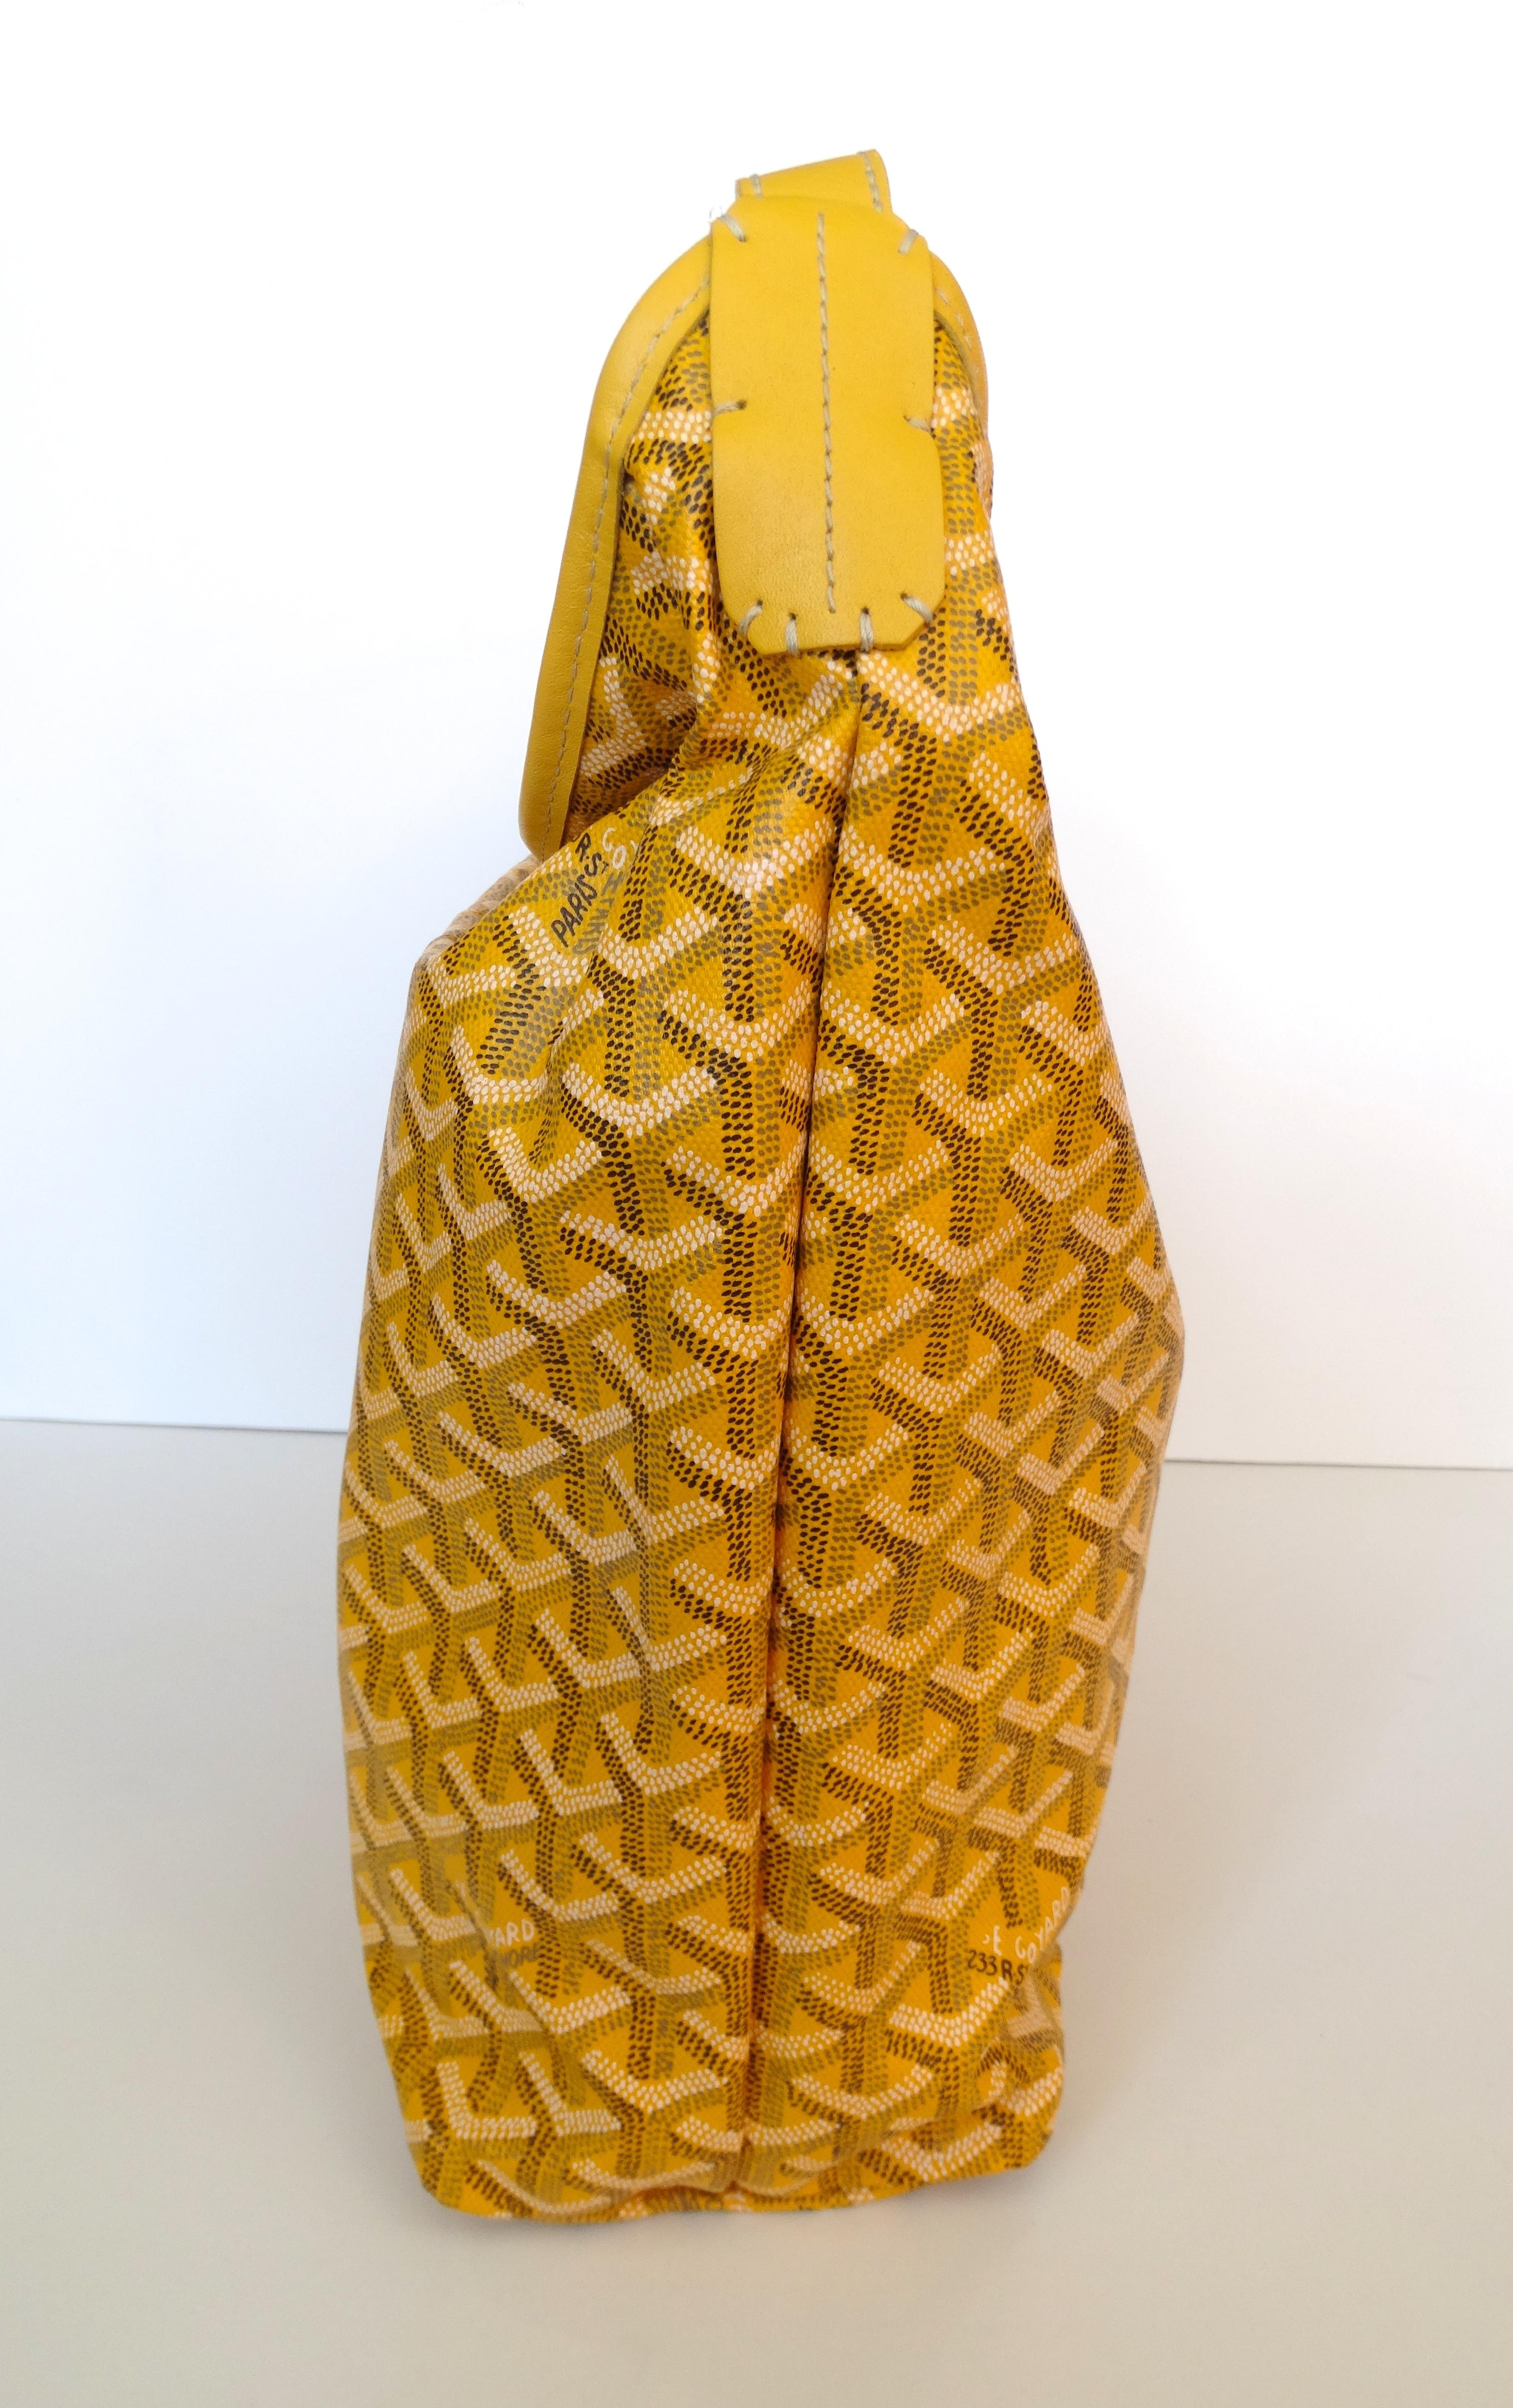 The Perfect Tote Bag For Every Day! Circa 1990s, this particular style is no longer in production, making it the perfect vintage item! This Goyard  Fidji hobo bag features the iconic Goyard monogram all over and is made of yellow cowhide leather.